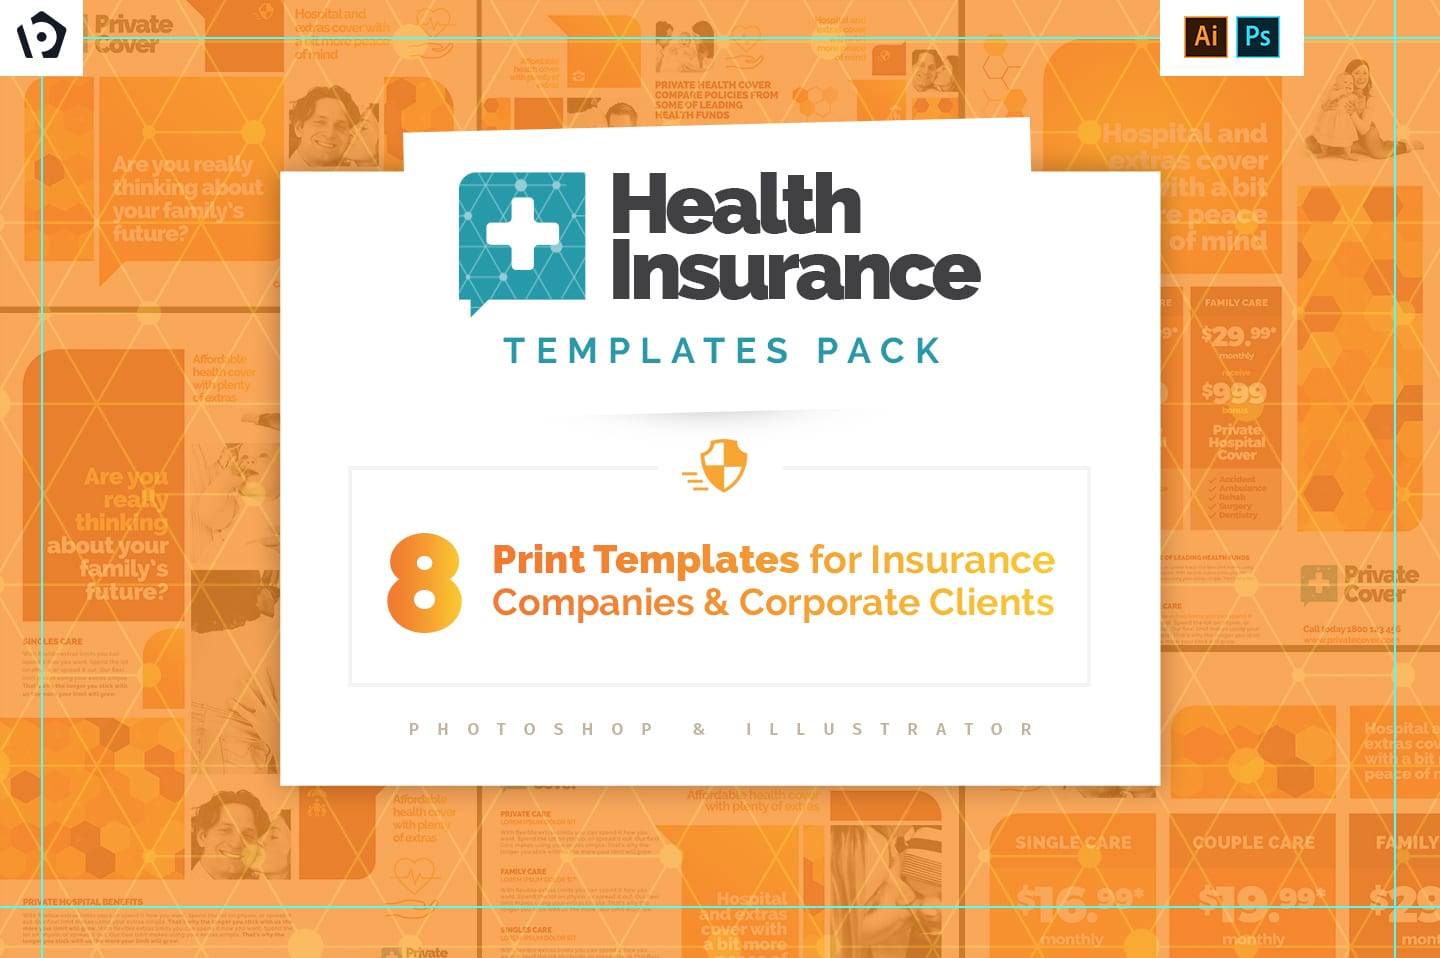 Health Insurance Templates Pack